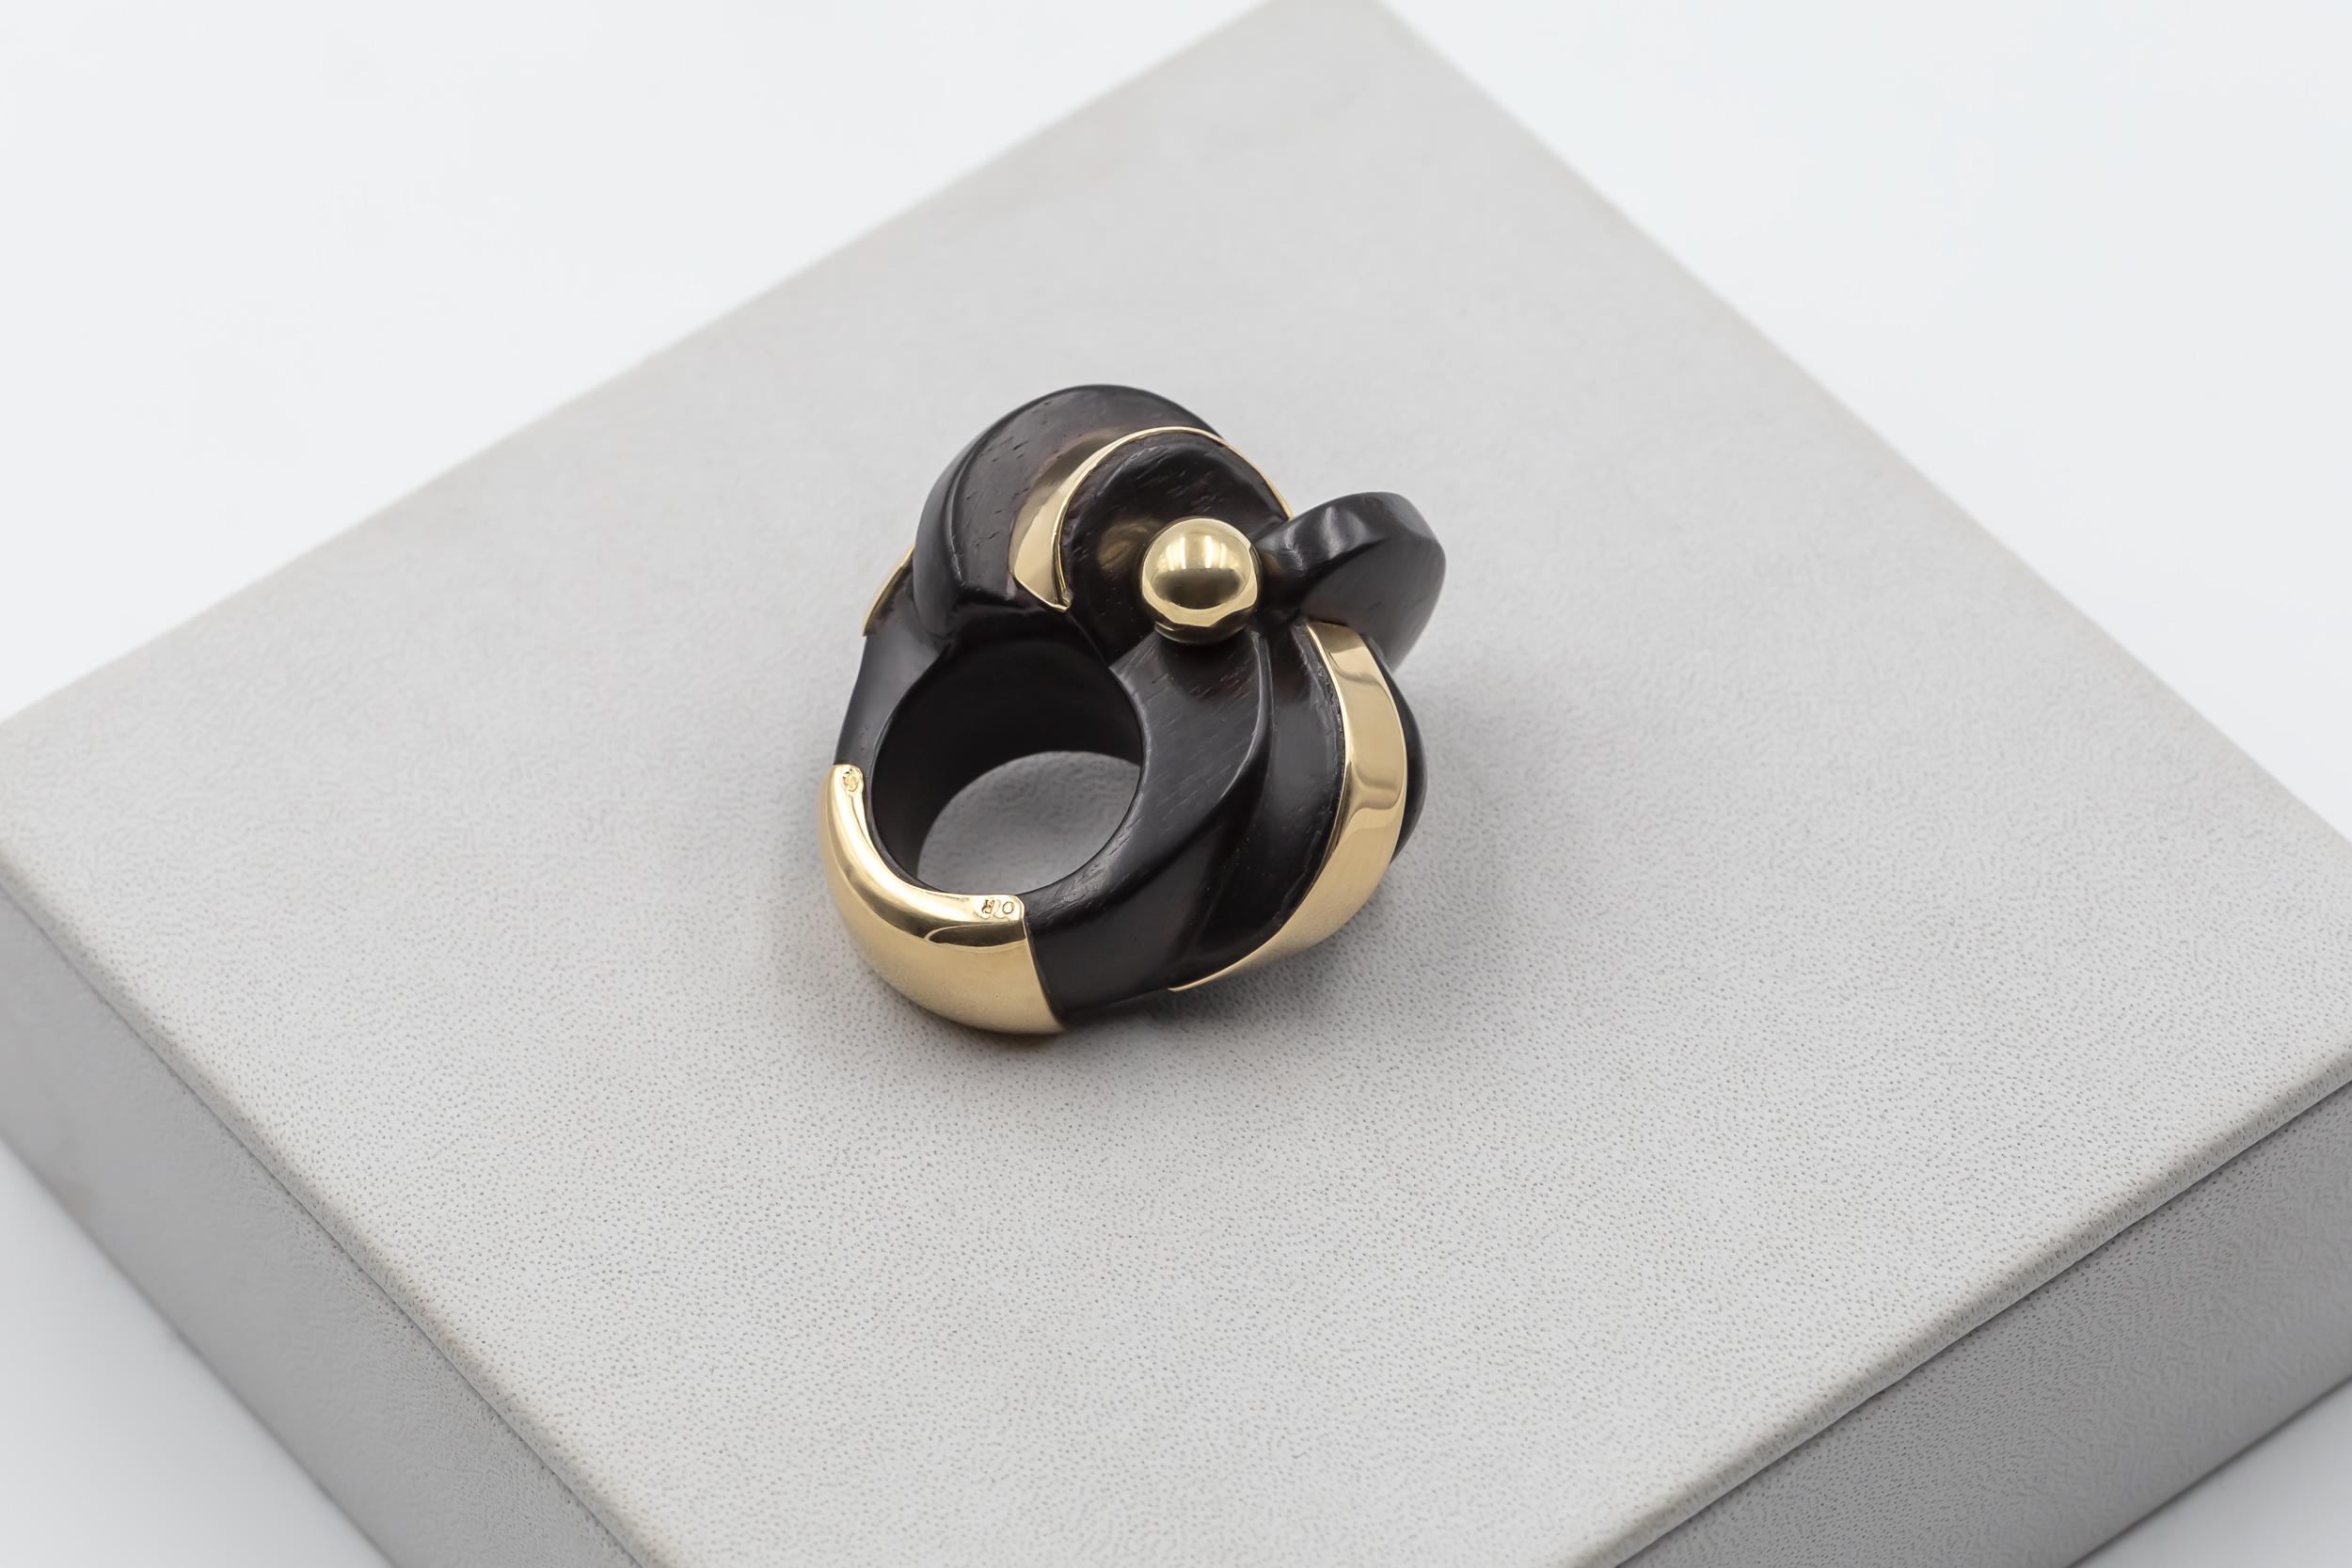 The Ebony and 18ct gold sculpture ring designed by Sophia Vari sounds like a unique and exclusive piece. Limited to a total of 6 pieces, with 2 artist proofs (AP), it adds to its rarity and desirability.

The specific ring offered on 1stDibs is